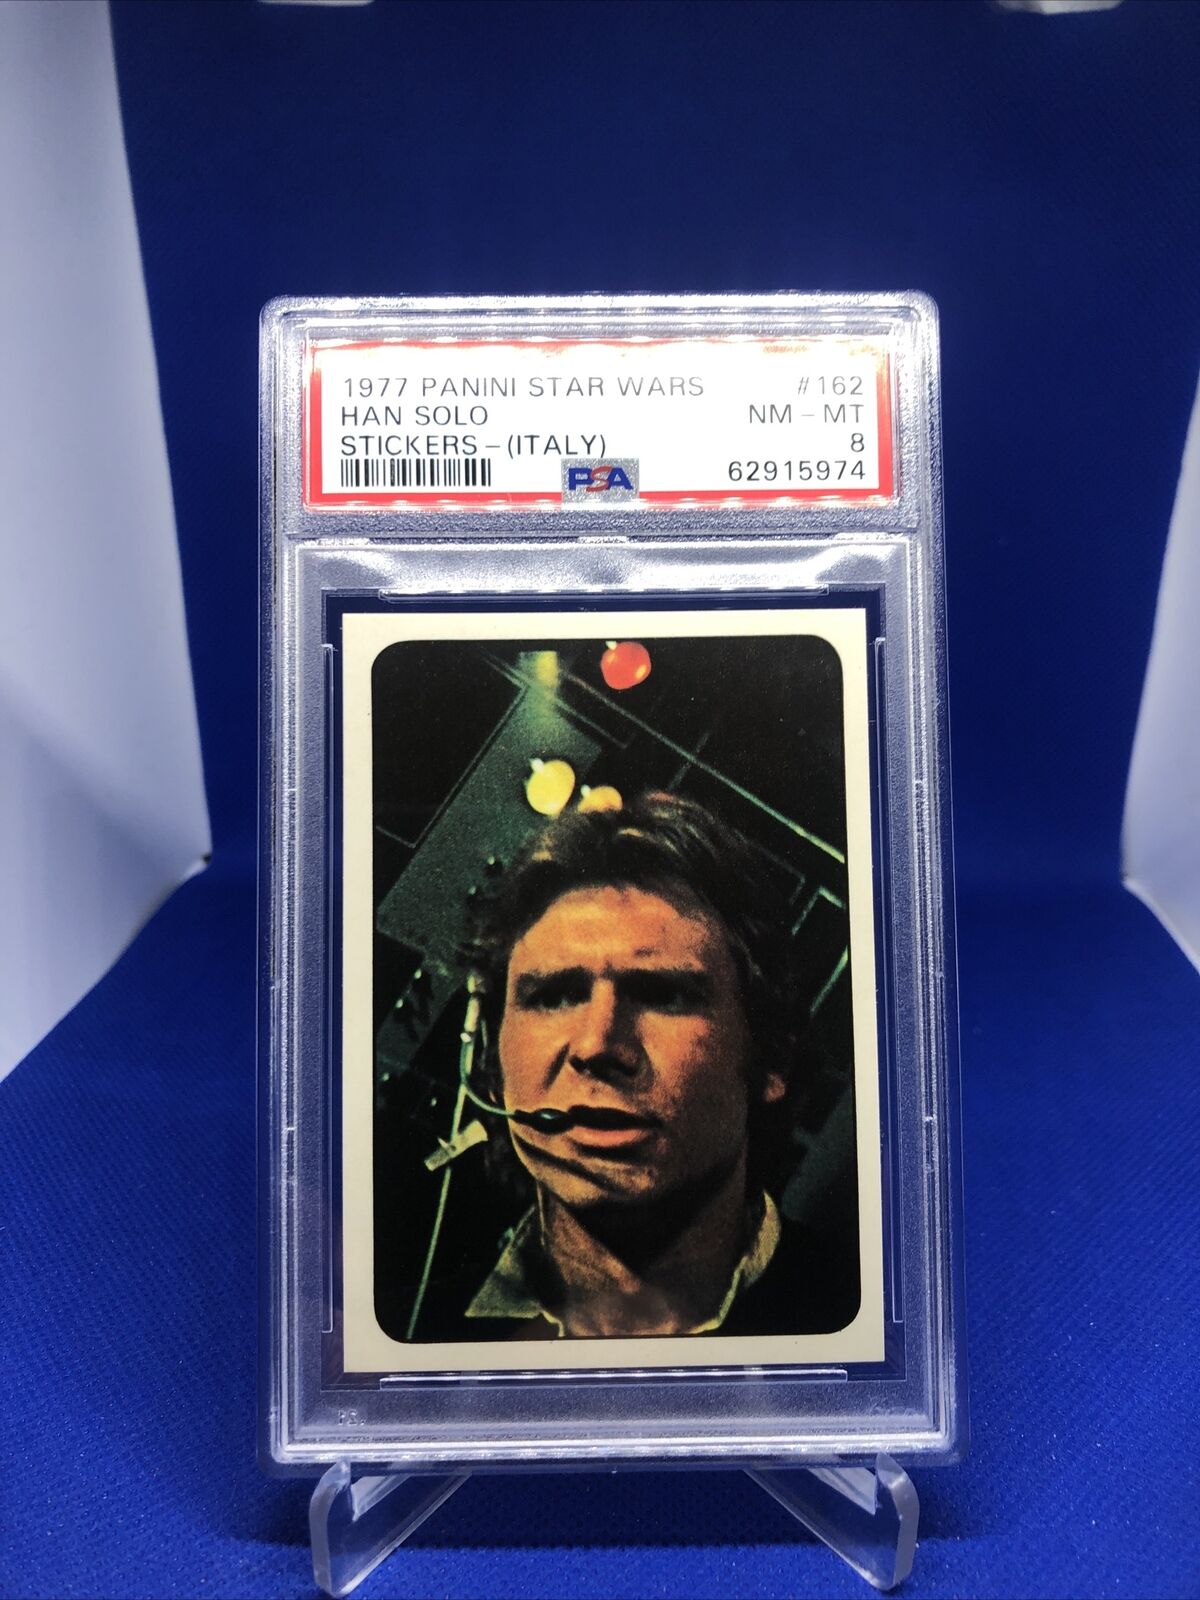 1977 Panini Star Wars Stickers (Italy) Han Solo RC #162 Rookie Card PSA 8 NM-MT